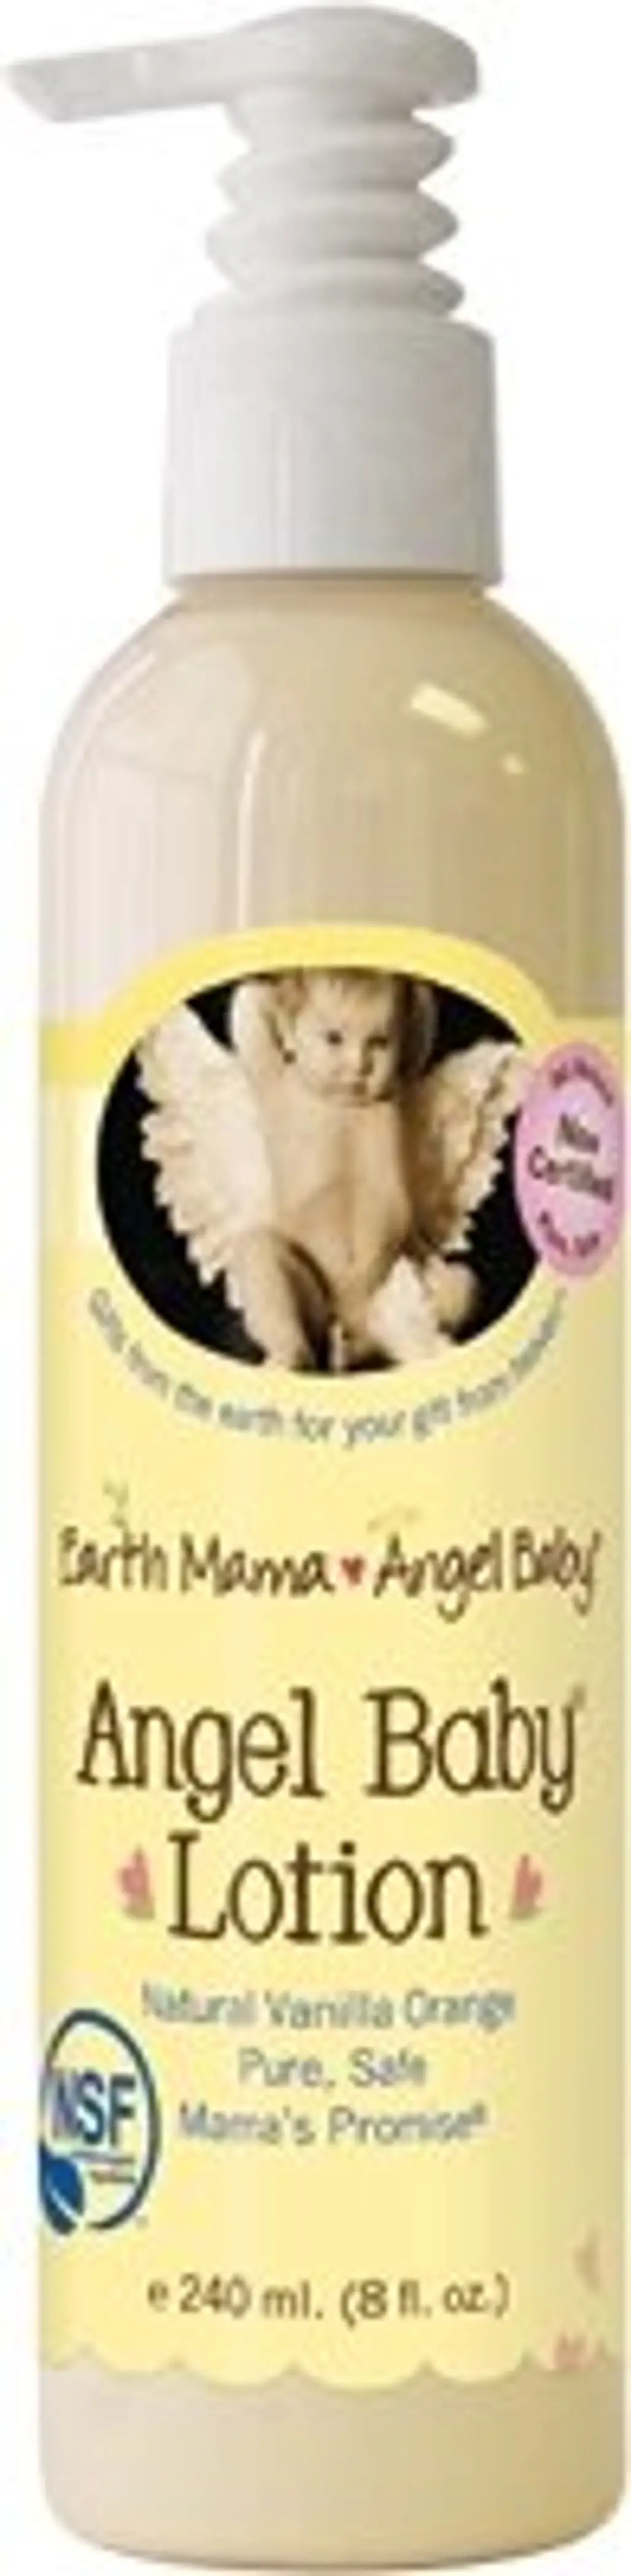 Angel Baby Lotion